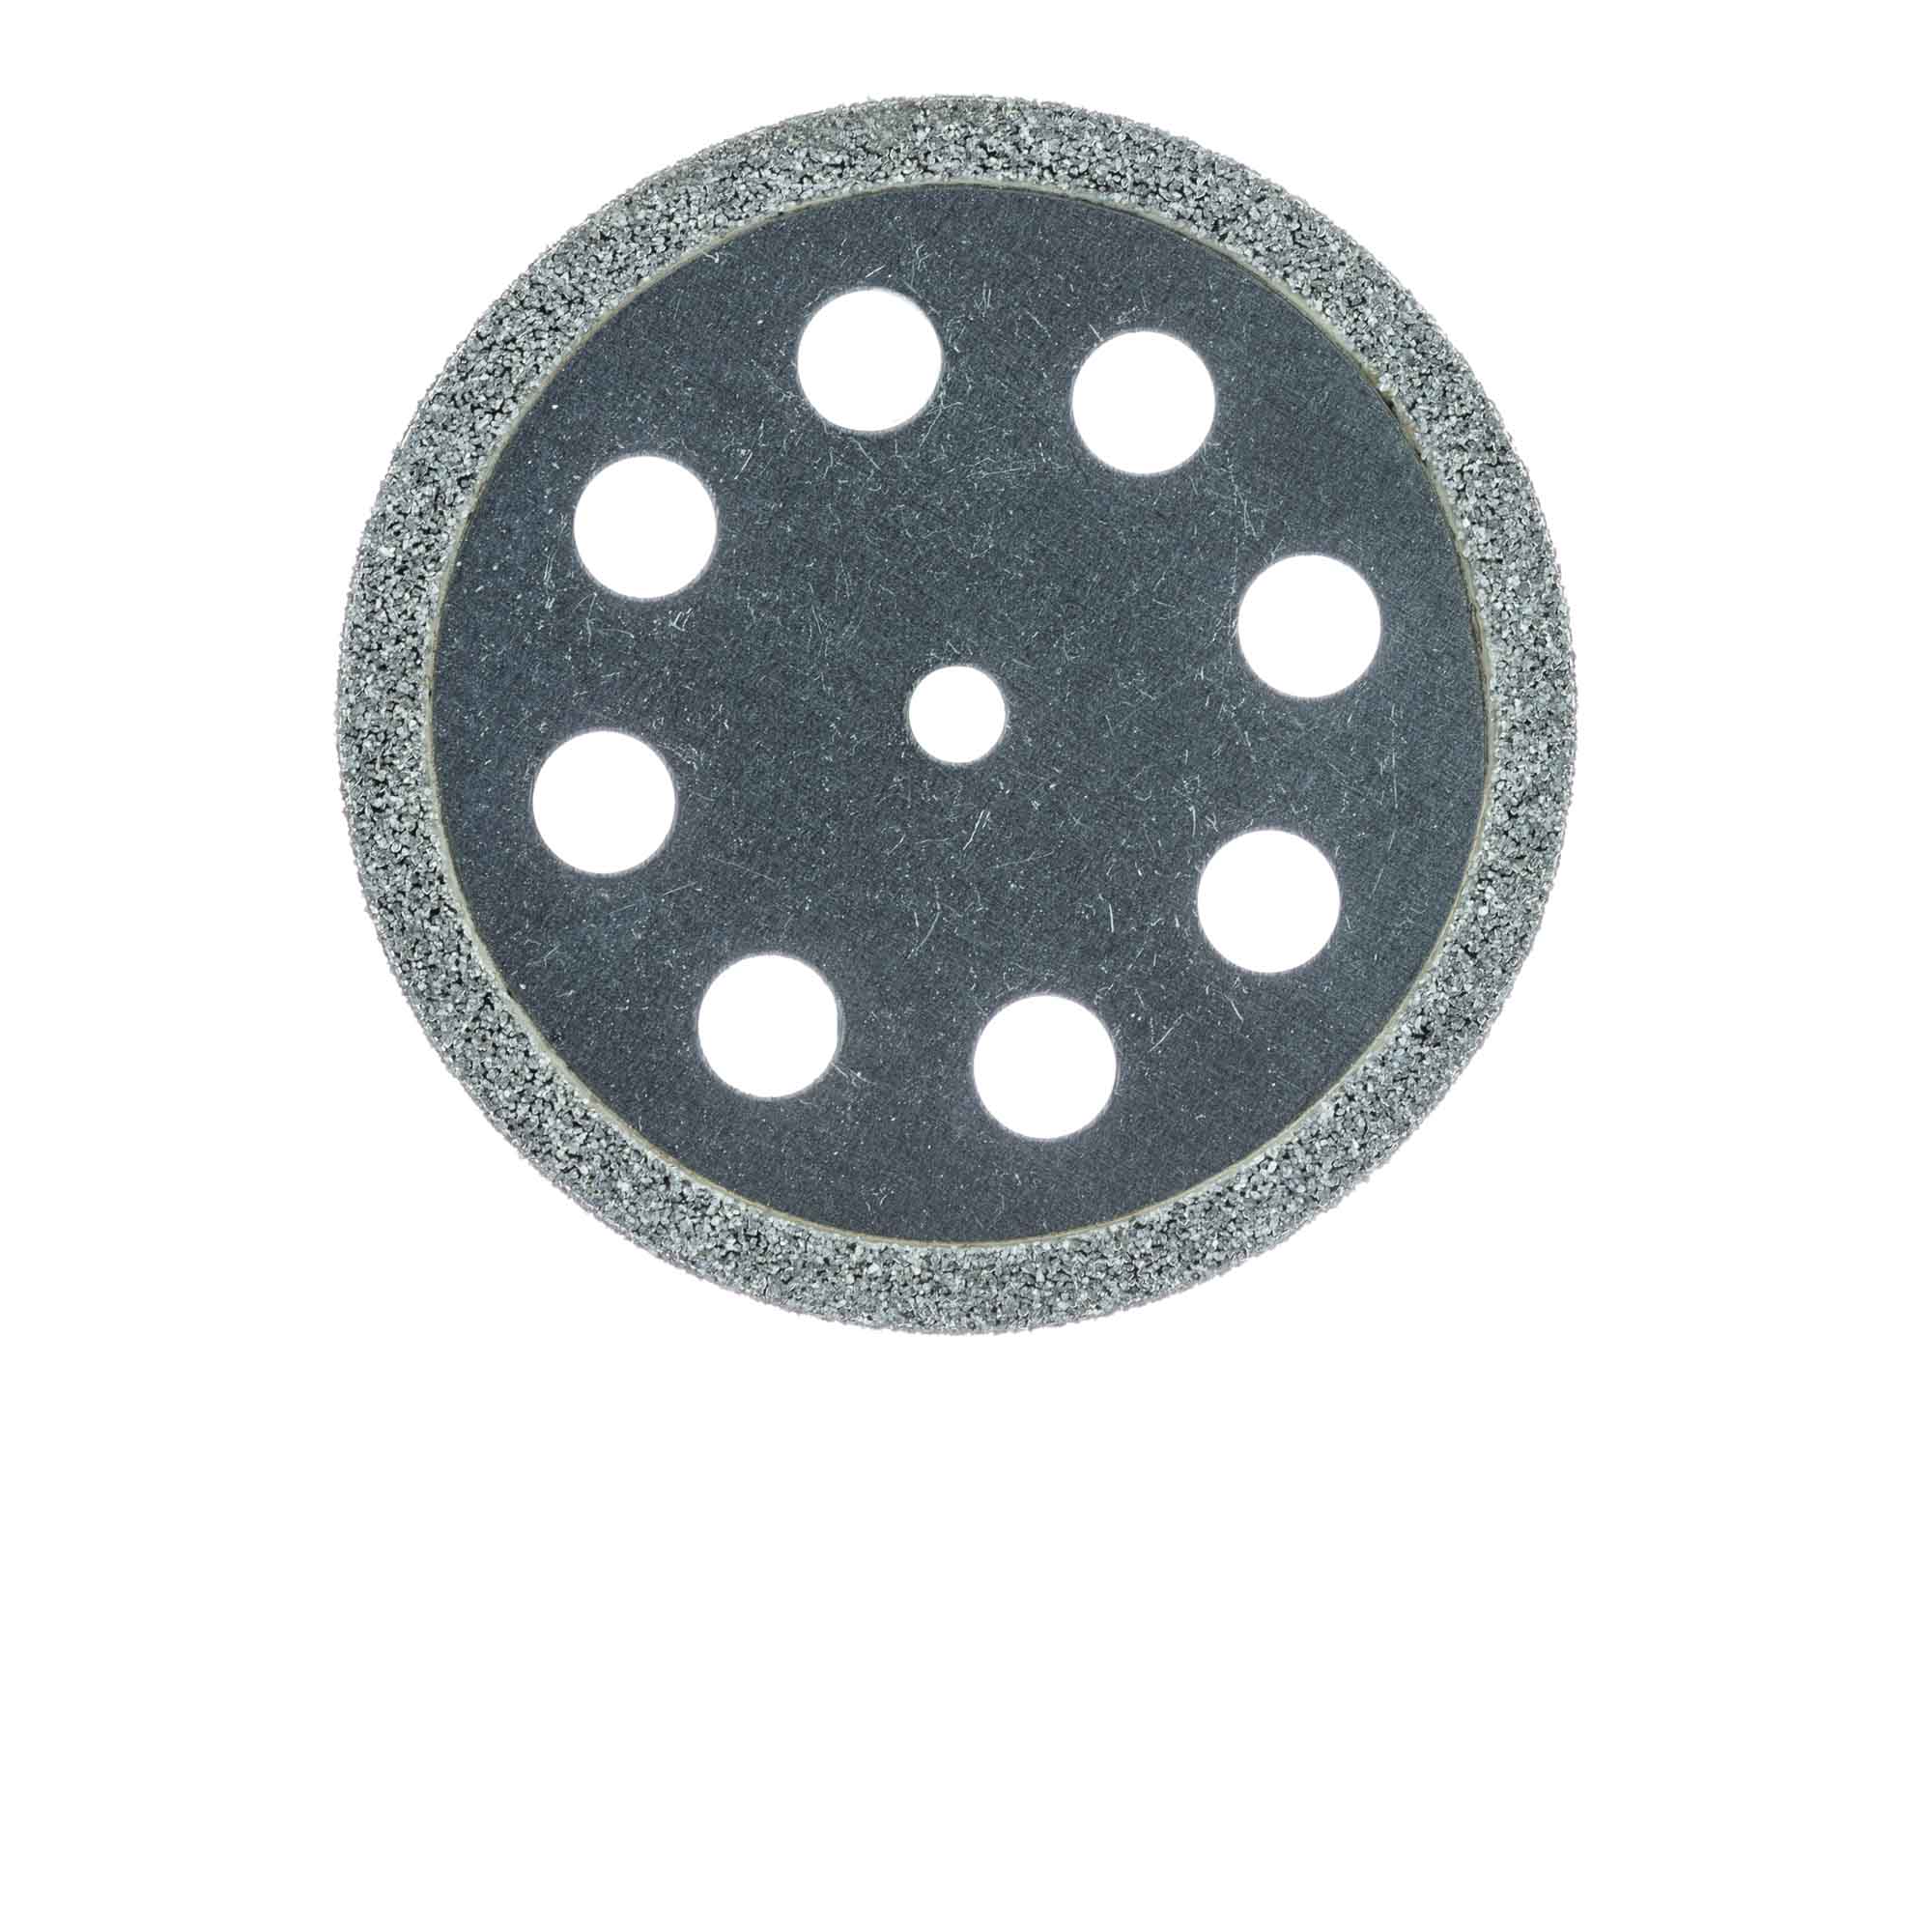 911D-220-UNM Diamond Bur, Perforated Disc, Double Sided, 0.5mm Thick, 22mm Ø, UNM